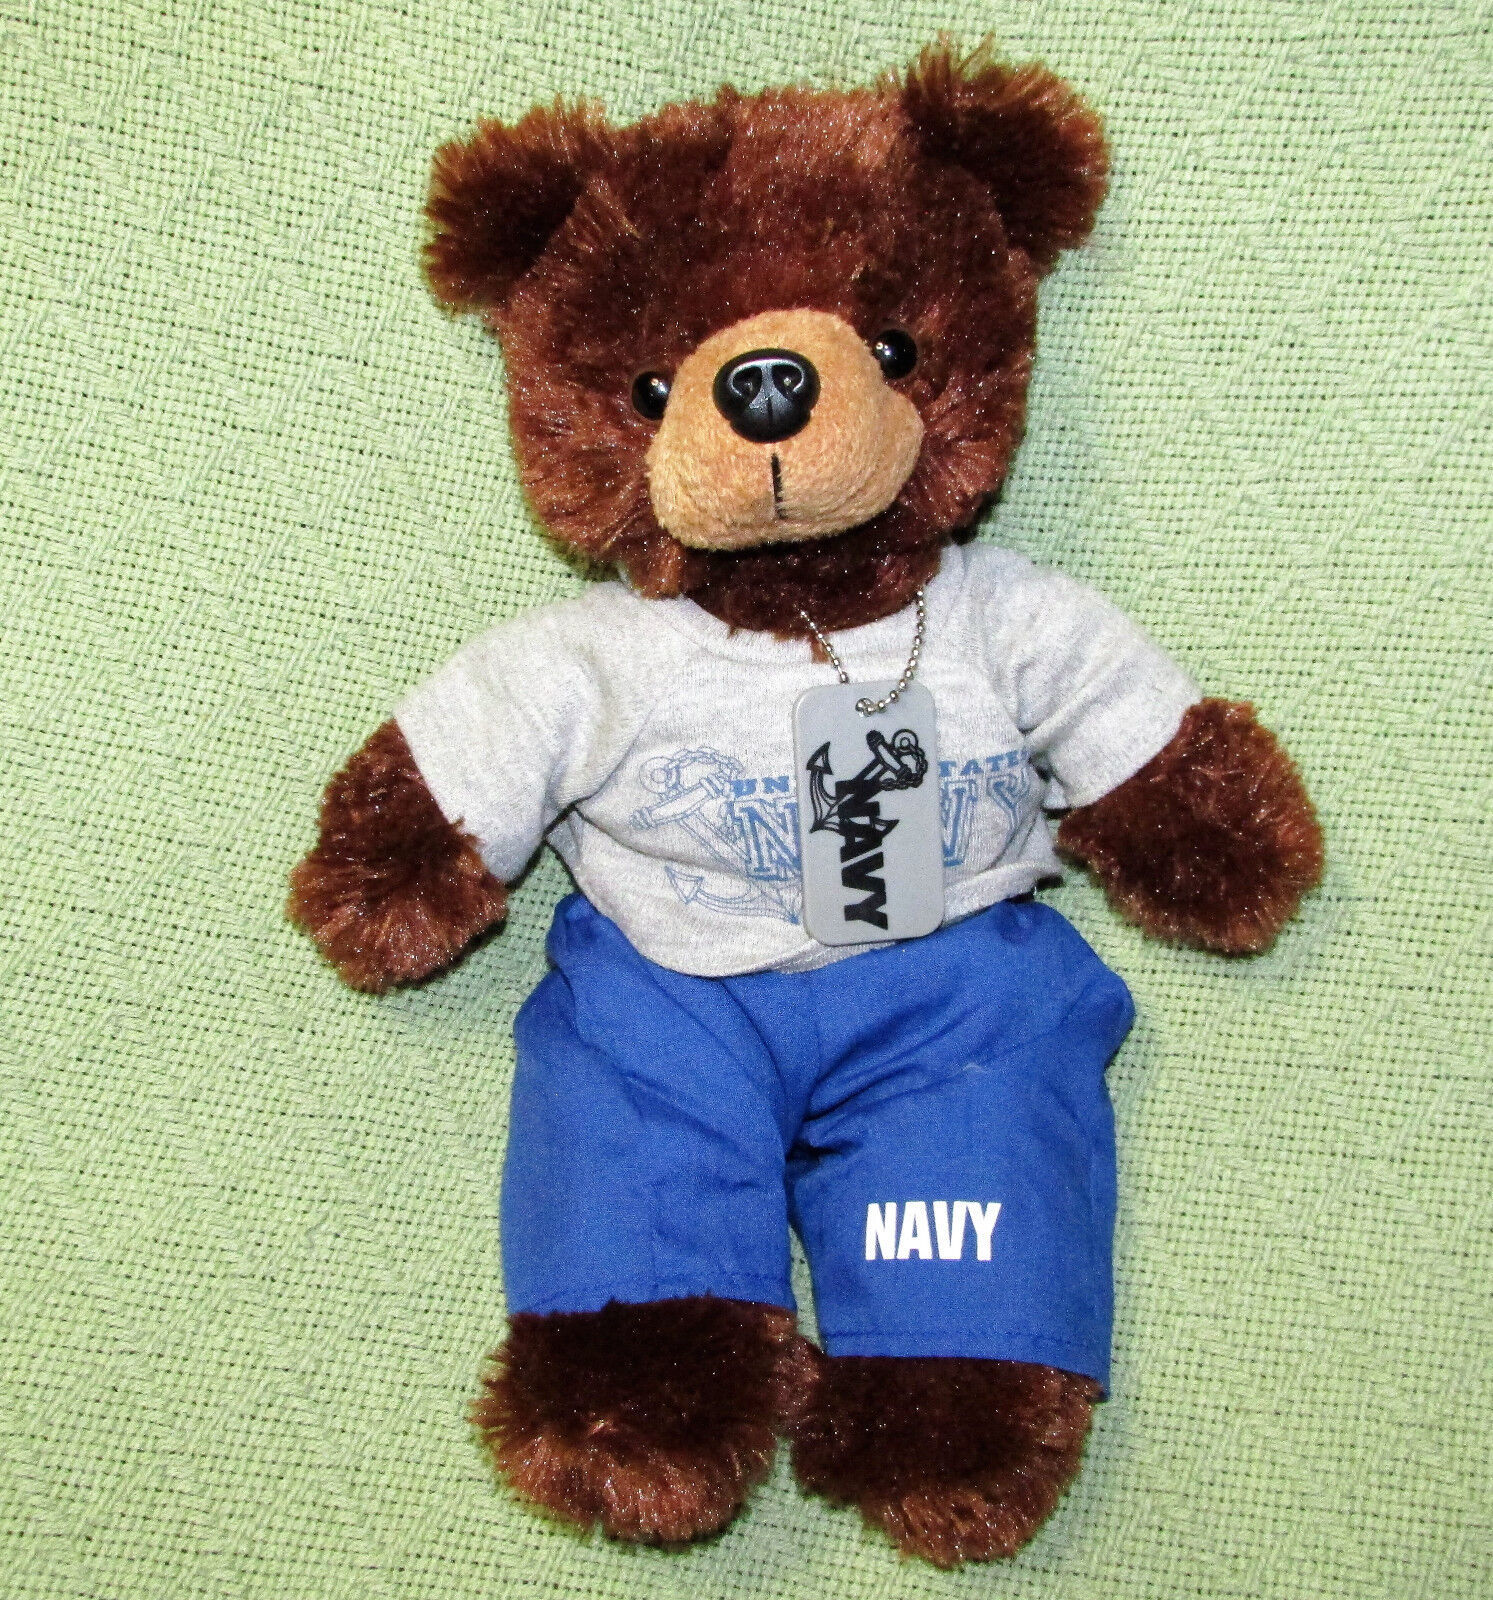 1988 NAVY TEDDY BEAR PLUSH Pur Fection 11" Vintage UNITED STATES MJC WITH TAG - $15.75